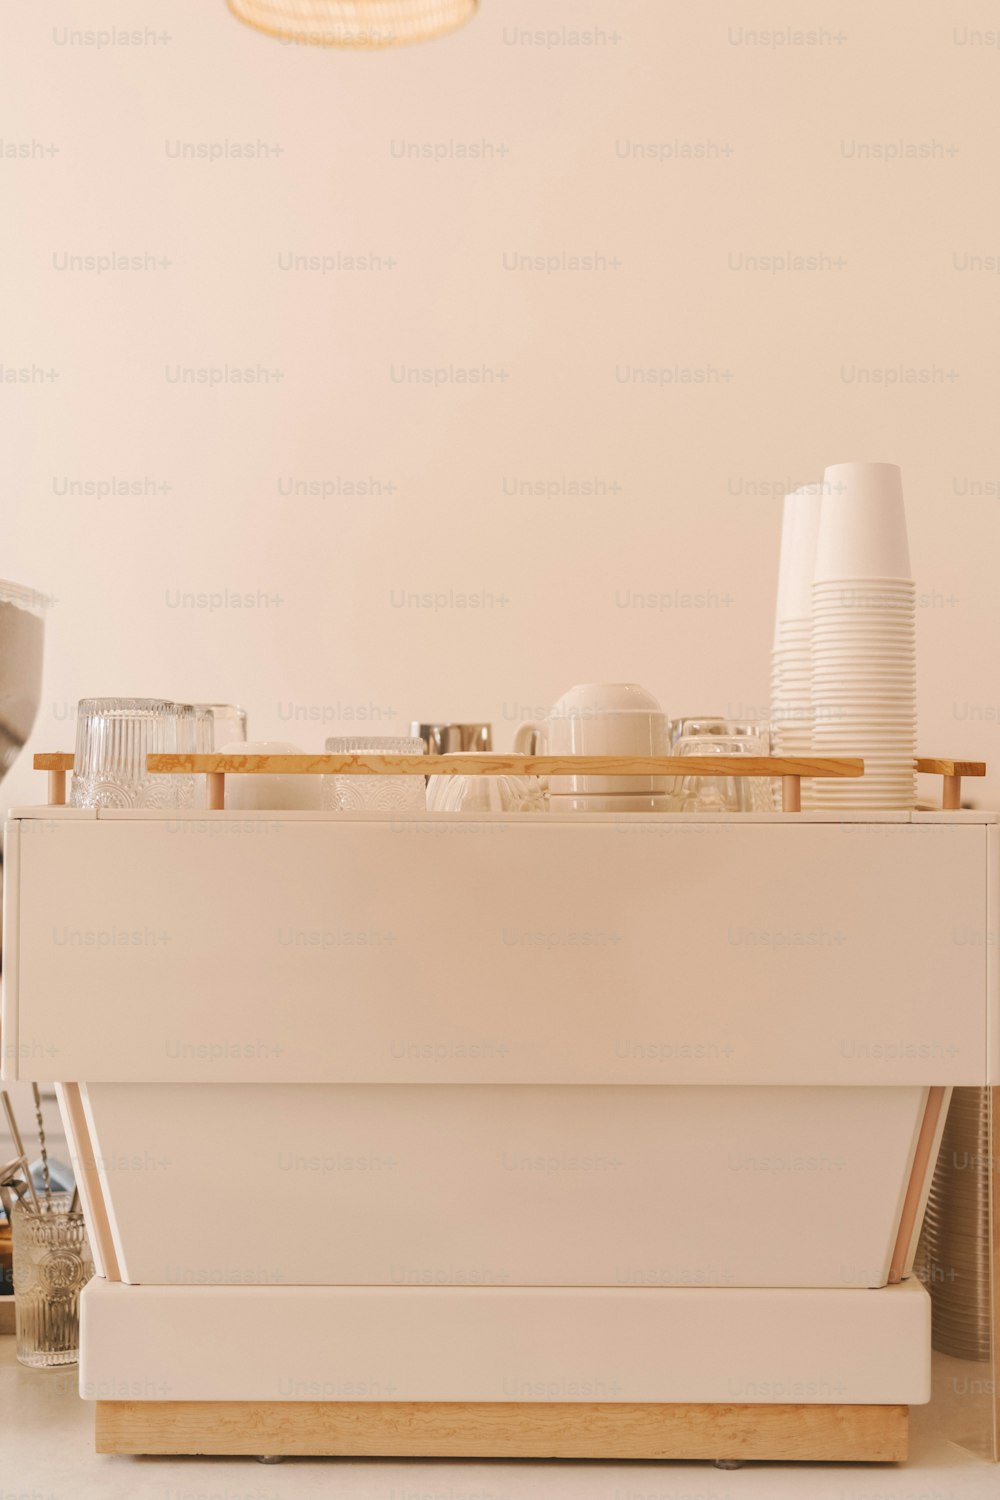 a white counter with plates and cups on it